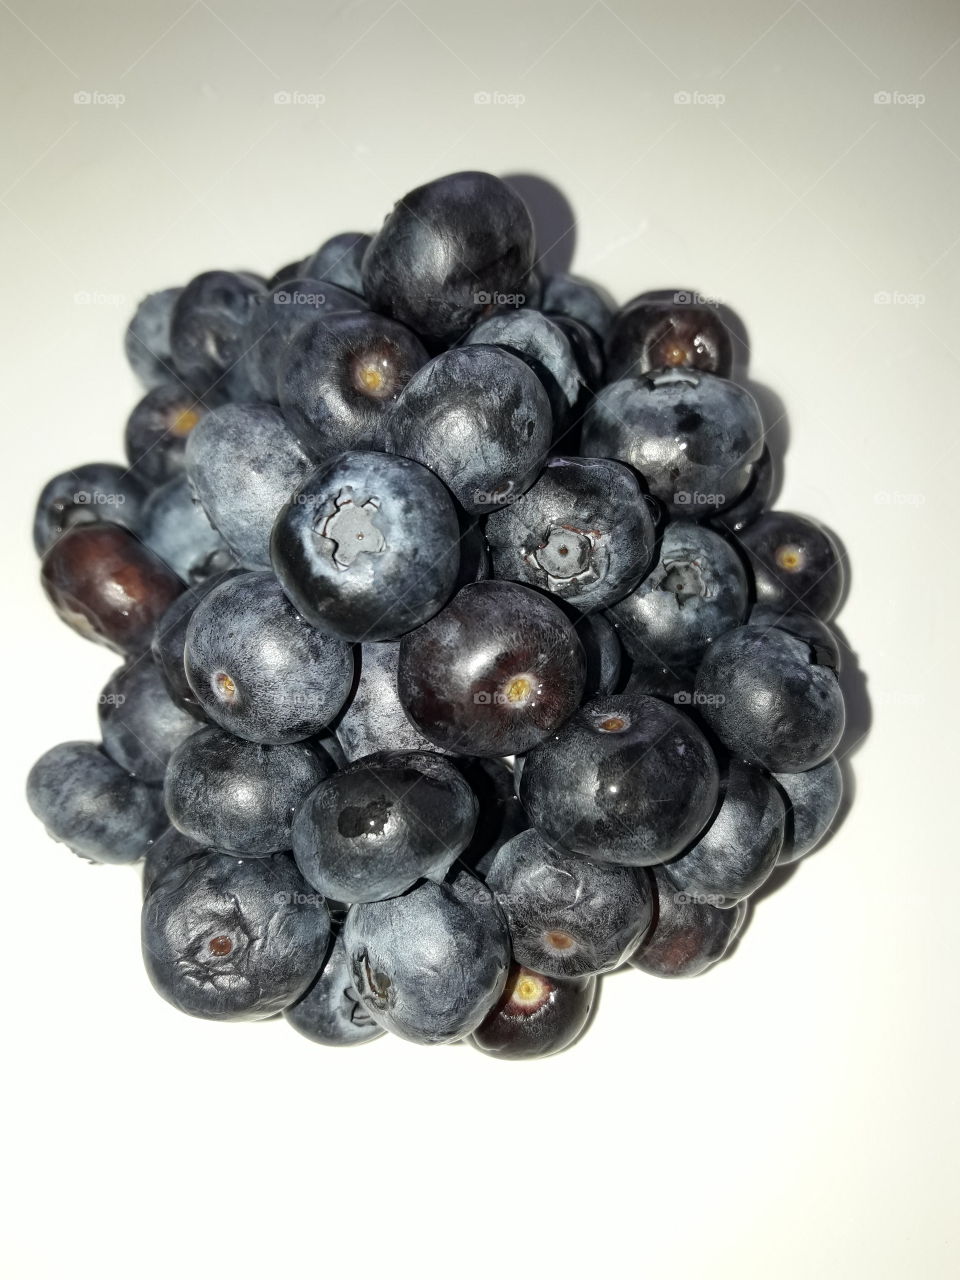 Blueberries contain a plant compound called anthocyanin. Blueberries can help heart health, bone strength, skin health, blood pressure, diabetes management, cancer prevention and mental health.